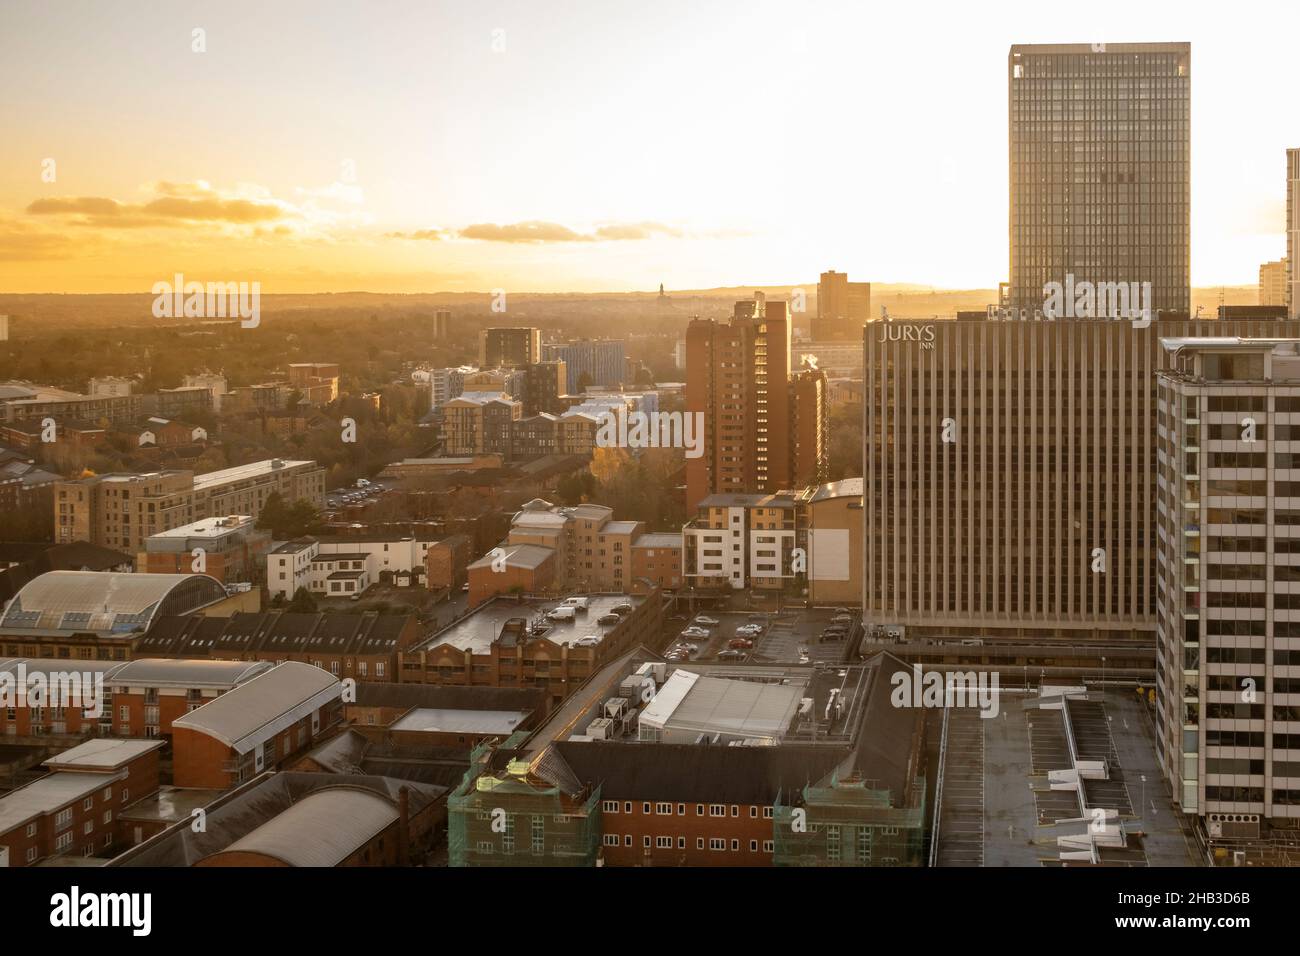 A cityscape of the Westside of Birmingham, showing apartments and jurys inn Stock Photo